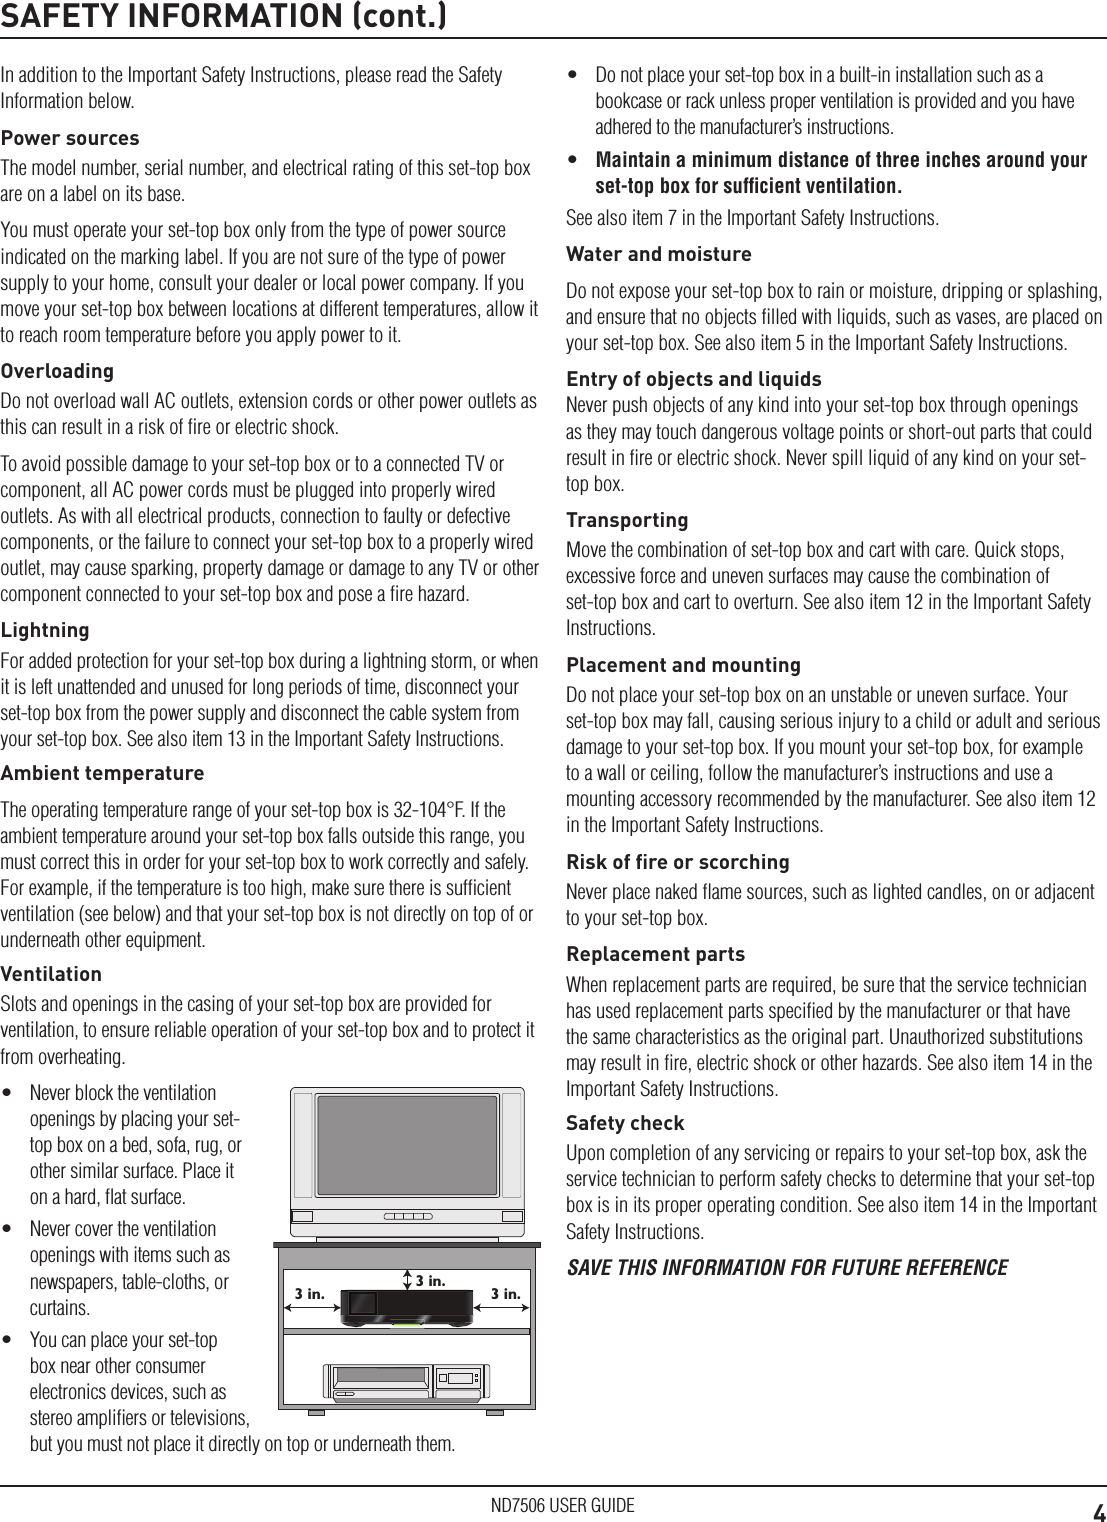 4ND7506 USER GUIDESAFETY INFORMATION (cont.)In addition to the Important Safety Instructions, please read the Safety Information below.Power sourcesThe model number, serial number, and electrical rating of this set-top box are on a label on its base.You must operate your set-top box only from the type of power source indicated on the marking label. If you are not sure of the type of power supply to your home, consult your dealer or local power company. If you move your set-top box between locations at different temperatures, allow it to reach room temperature before you apply power to it.OverloadingDo not overload wall AC outlets, extension cords or other power outlets as this can result in a risk of ﬁre or electric shock.To avoid possible damage to your set-top box or to a connected TV or component, all AC power cords must be plugged into properly wired outlets. As with all electrical products, connection to faulty or defective components, or the failure to connect your set-top box to a properly wired outlet, may cause sparking, property damage or damage to any TV or other component connected to your set-top box and pose a ﬁre hazard.LightningFor added protection for your set-top box during a lightning storm, or when it is left unattended and unused for long periods of time, disconnect your set-top box from the power supply and disconnect the cable system from your set-top box. See also item 13 in the Important Safety Instructions.Ambient temperatureThe operating temperature range of your set-top box is 32-104°F. If the ambient temperature around your set-top box falls outside this range, you must correct this in order for your set-top box to work correctly and safely. For example, if the temperature is too high, make sure there is sufﬁcient ventilation (see below) and that your set-top box is not directly on top of or underneath other equipment.VentilationSlots and openings in the casing of your set-top box are provided for ventilation, to ensure reliable operation of your set-top box and to protect it from overheating.•  Never block the ventilation openings by placing your set-top box on a bed, sofa, rug, or other similar surface. Place it on a hard, ﬂat surface.•  Never cover the ventilation openings with items such as newspapers, table-cloths, or curtains.•  You can place your set-top box near other consumer electronics devices, such as stereo ampliﬁers or televisions, but you must not place it directly on top or underneath them.3 in.3 in.3 in.•  Do not place your set-top box in a built-in installation such as a bookcase or rack unless proper ventilation is provided and you have adhered to the manufacturer’s instructions.•  Maintain a minimum distance of three inches around your set-top box for sufﬁcient ventilation.See also item 7 in the Important Safety Instructions.Water and moistureDo not expose your set-top box to rain or moisture, dripping or splashing, and ensure that no objects ﬁlled with liquids, such as vases, are placed on your set-top box. See also item 5 in the Important Safety Instructions.Entry of objects and liquidsNever push objects of any kind into your set-top box through openings as they may touch dangerous voltage points or short-out parts that could result in ﬁre or electric shock. Never spill liquid of any kind on your set-top box.TransportingMove the combination of set-top box and cart with care. Quick stops, excessive force and uneven surfaces may cause the combination of set-top box and cart to overturn. See also item 12 in the Important Safety Instructions.Placement and mountingDo not place your set-top box on an unstable or uneven surface. Your set-top box may fall, causing serious injury to a child or adult and serious damage to your set-top box. If you mount your set-top box, for example to a wall or ceiling, follow the manufacturer’s instructions and use a mounting accessory recommended by the manufacturer. See also item 12 in the Important Safety Instructions.Risk of ﬁre or scorchingNever place naked ﬂame sources, such as lighted candles, on or adjacent to your set-top box.Replacement partsWhen replacement parts are required, be sure that the service technician has used replacement parts speciﬁed by the manufacturer or that have the same characteristics as the original part. Unauthorized substitutions may result in ﬁre, electric shock or other hazards. See also item 14 in the Important Safety Instructions.Safety checkUpon completion of any servicing or repairs to your set-top box, ask the service technician to perform safety checks to determine that your set-top box is in its proper operating condition. See also item 14 in the Important Safety Instructions.SAVE THIS INFORMATION FOR FUTURE REFERENCE